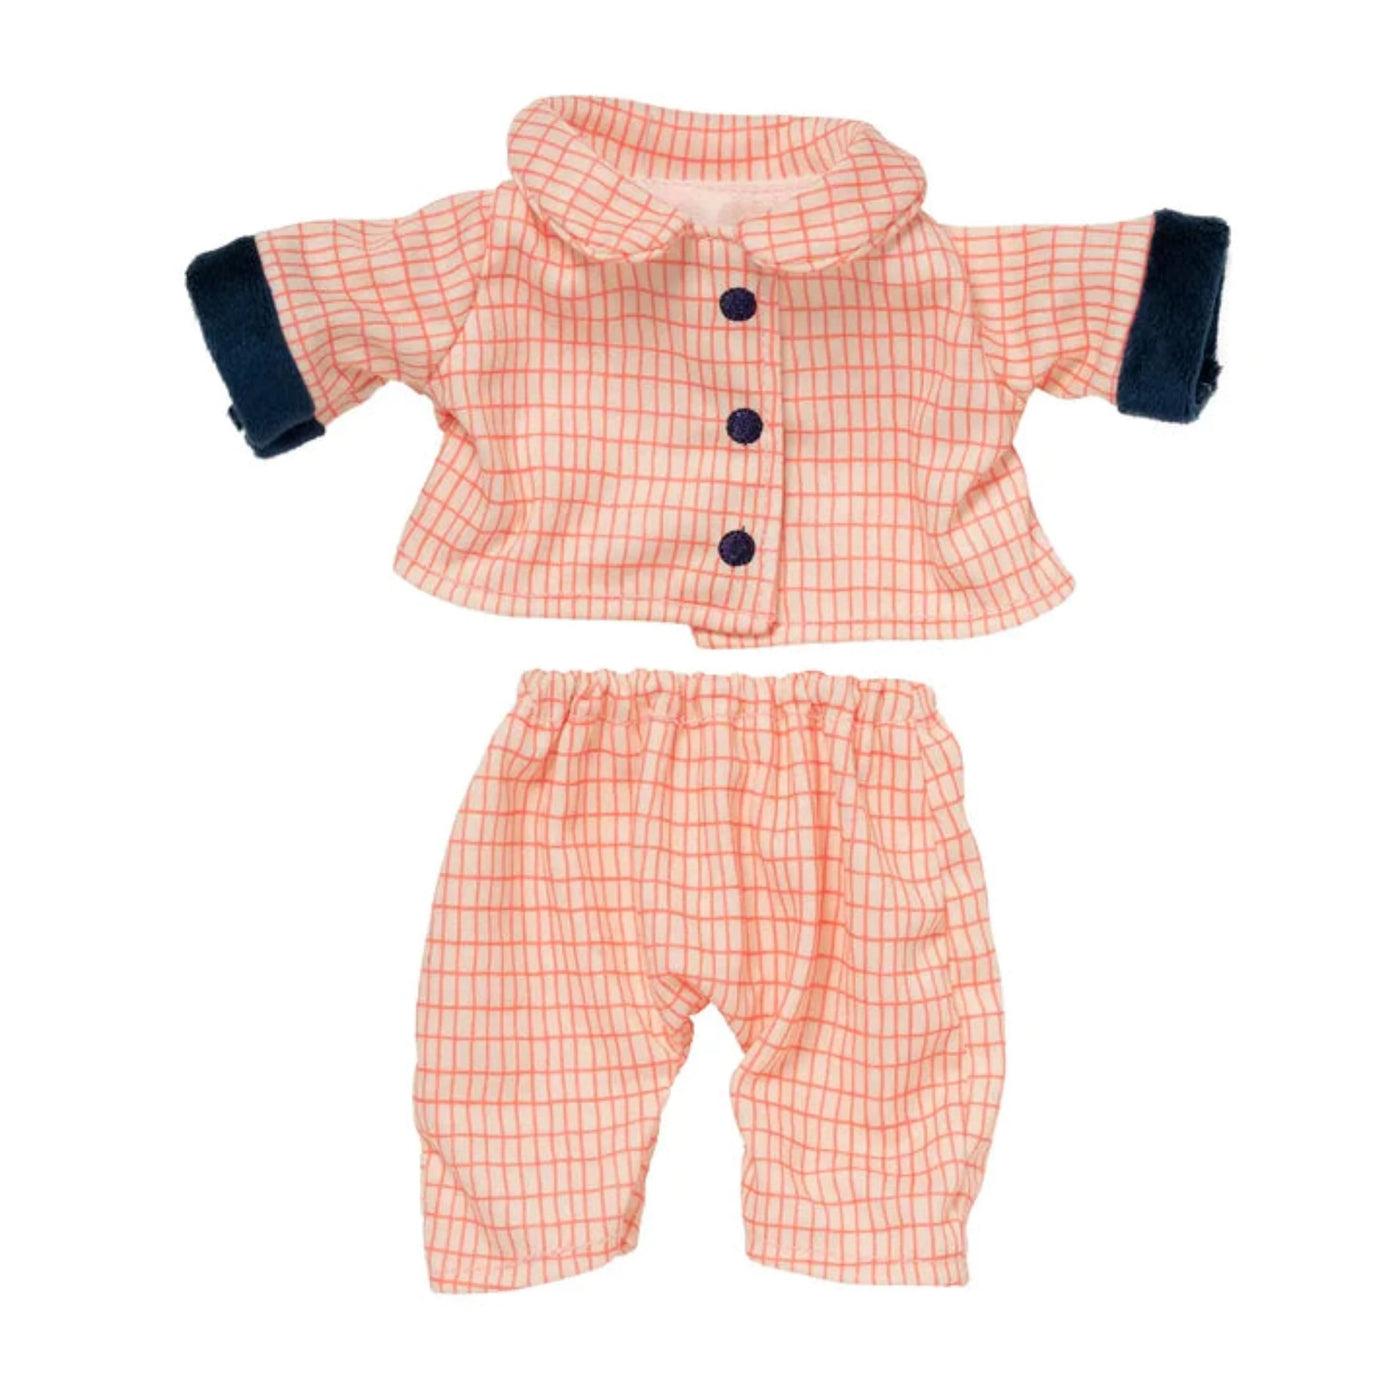 Wee Baby Stella Sleep Tight Outfit